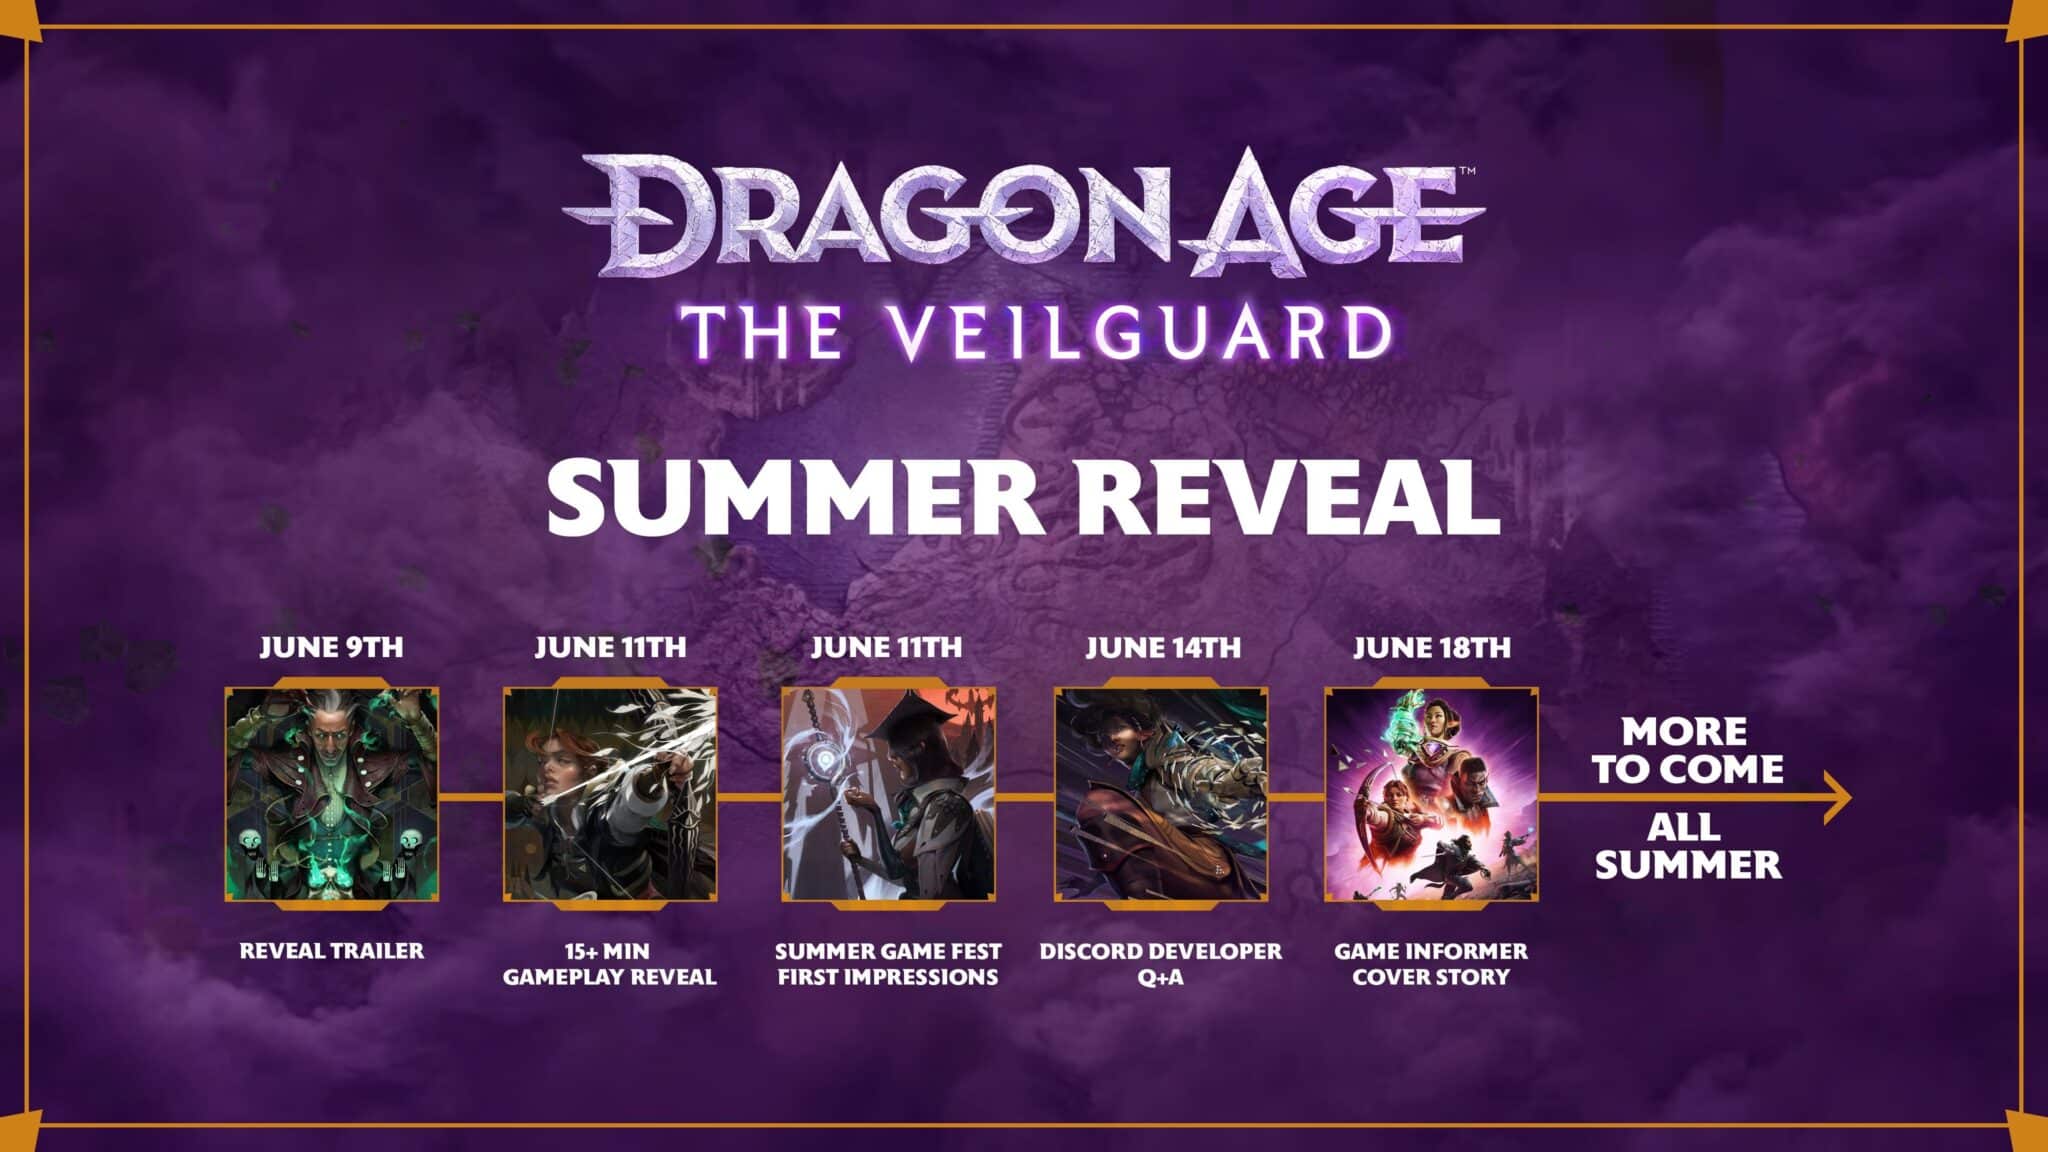 (Apparently you can look forward to lots of new information on Dragon Age: The Veilguard in the coming days.)